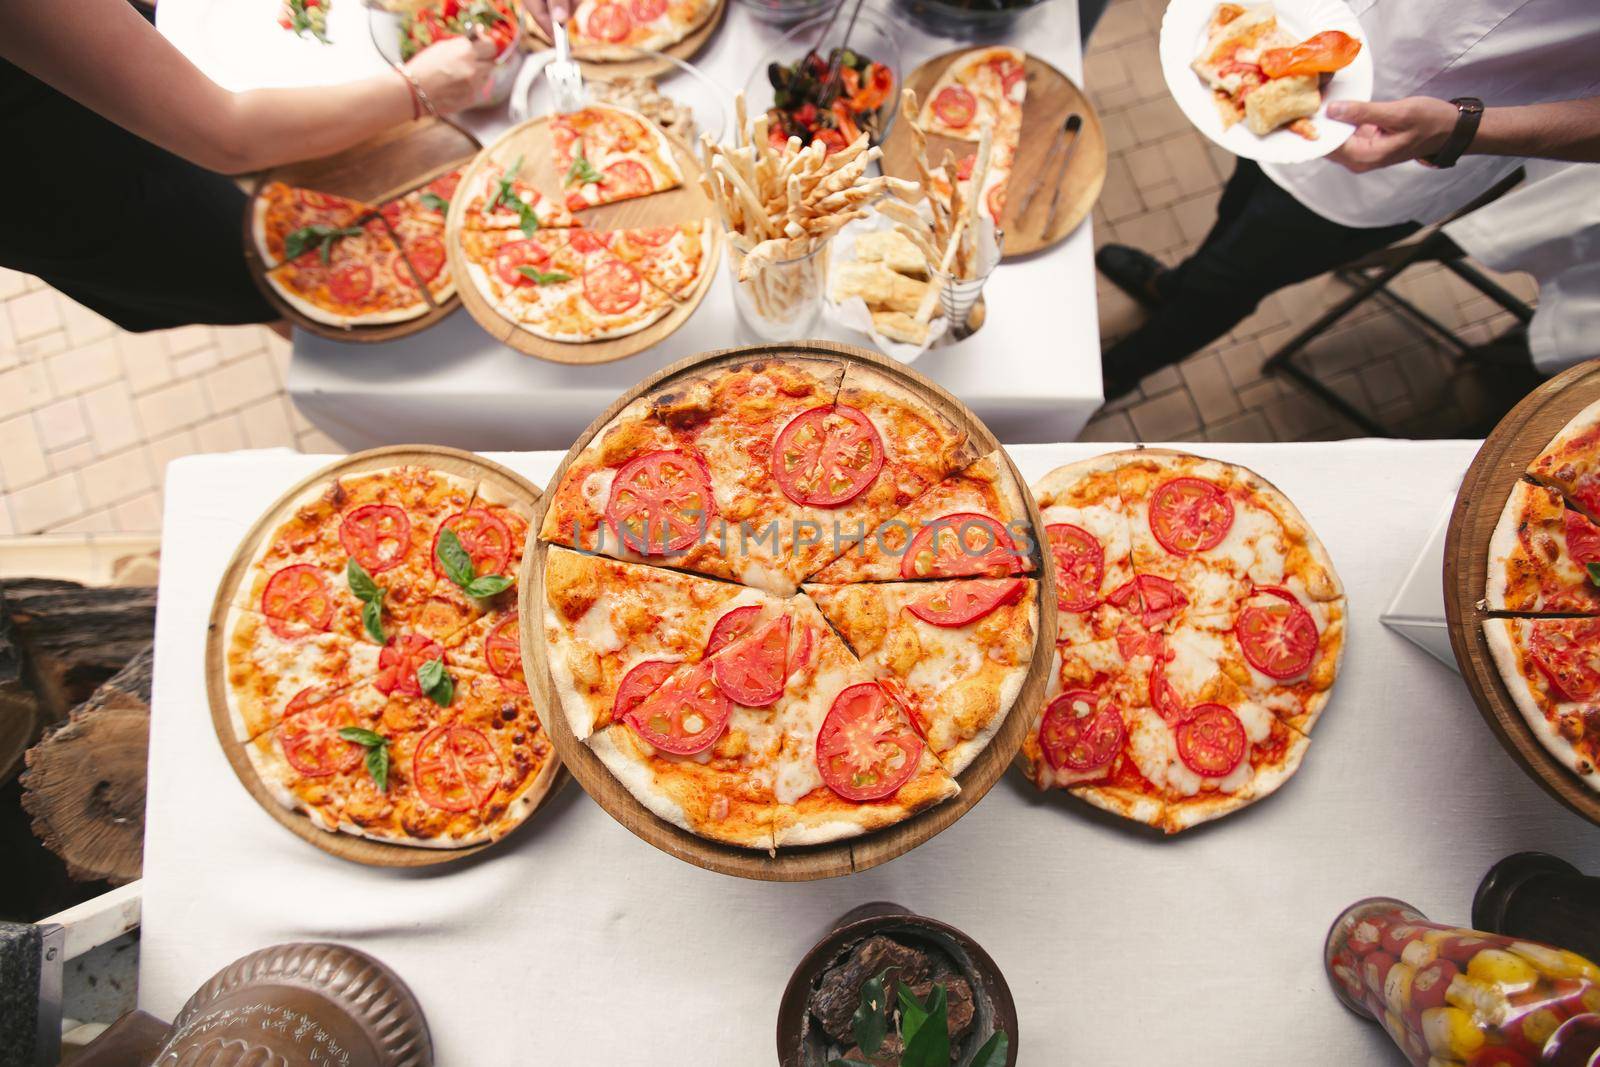 There are many different freshly prepared pizzas on the buffet table by StudioPeace